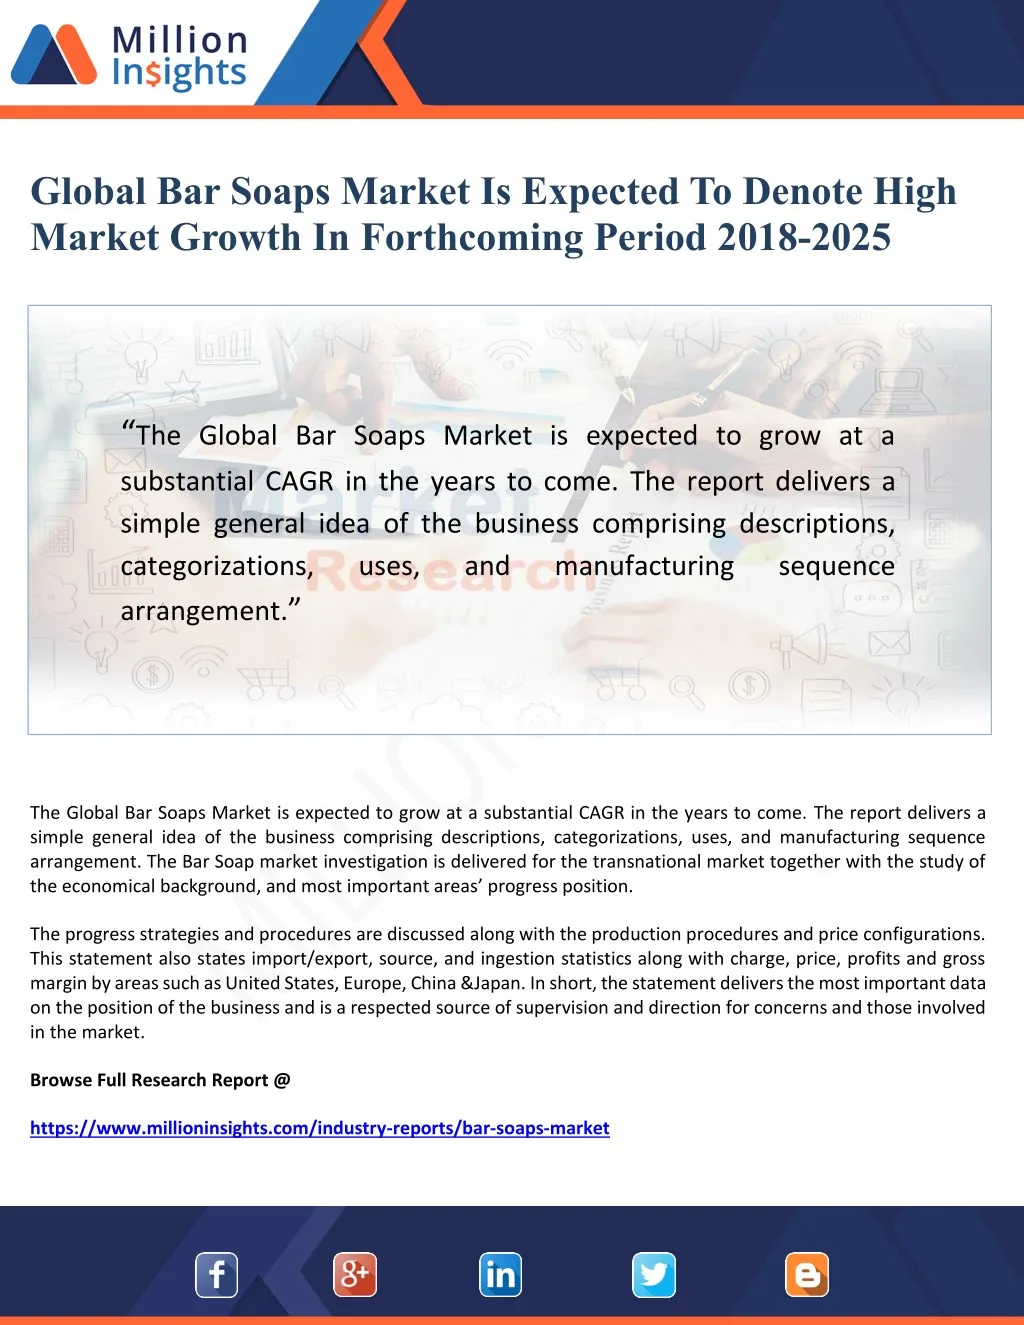 global bar soaps market is expected to denote